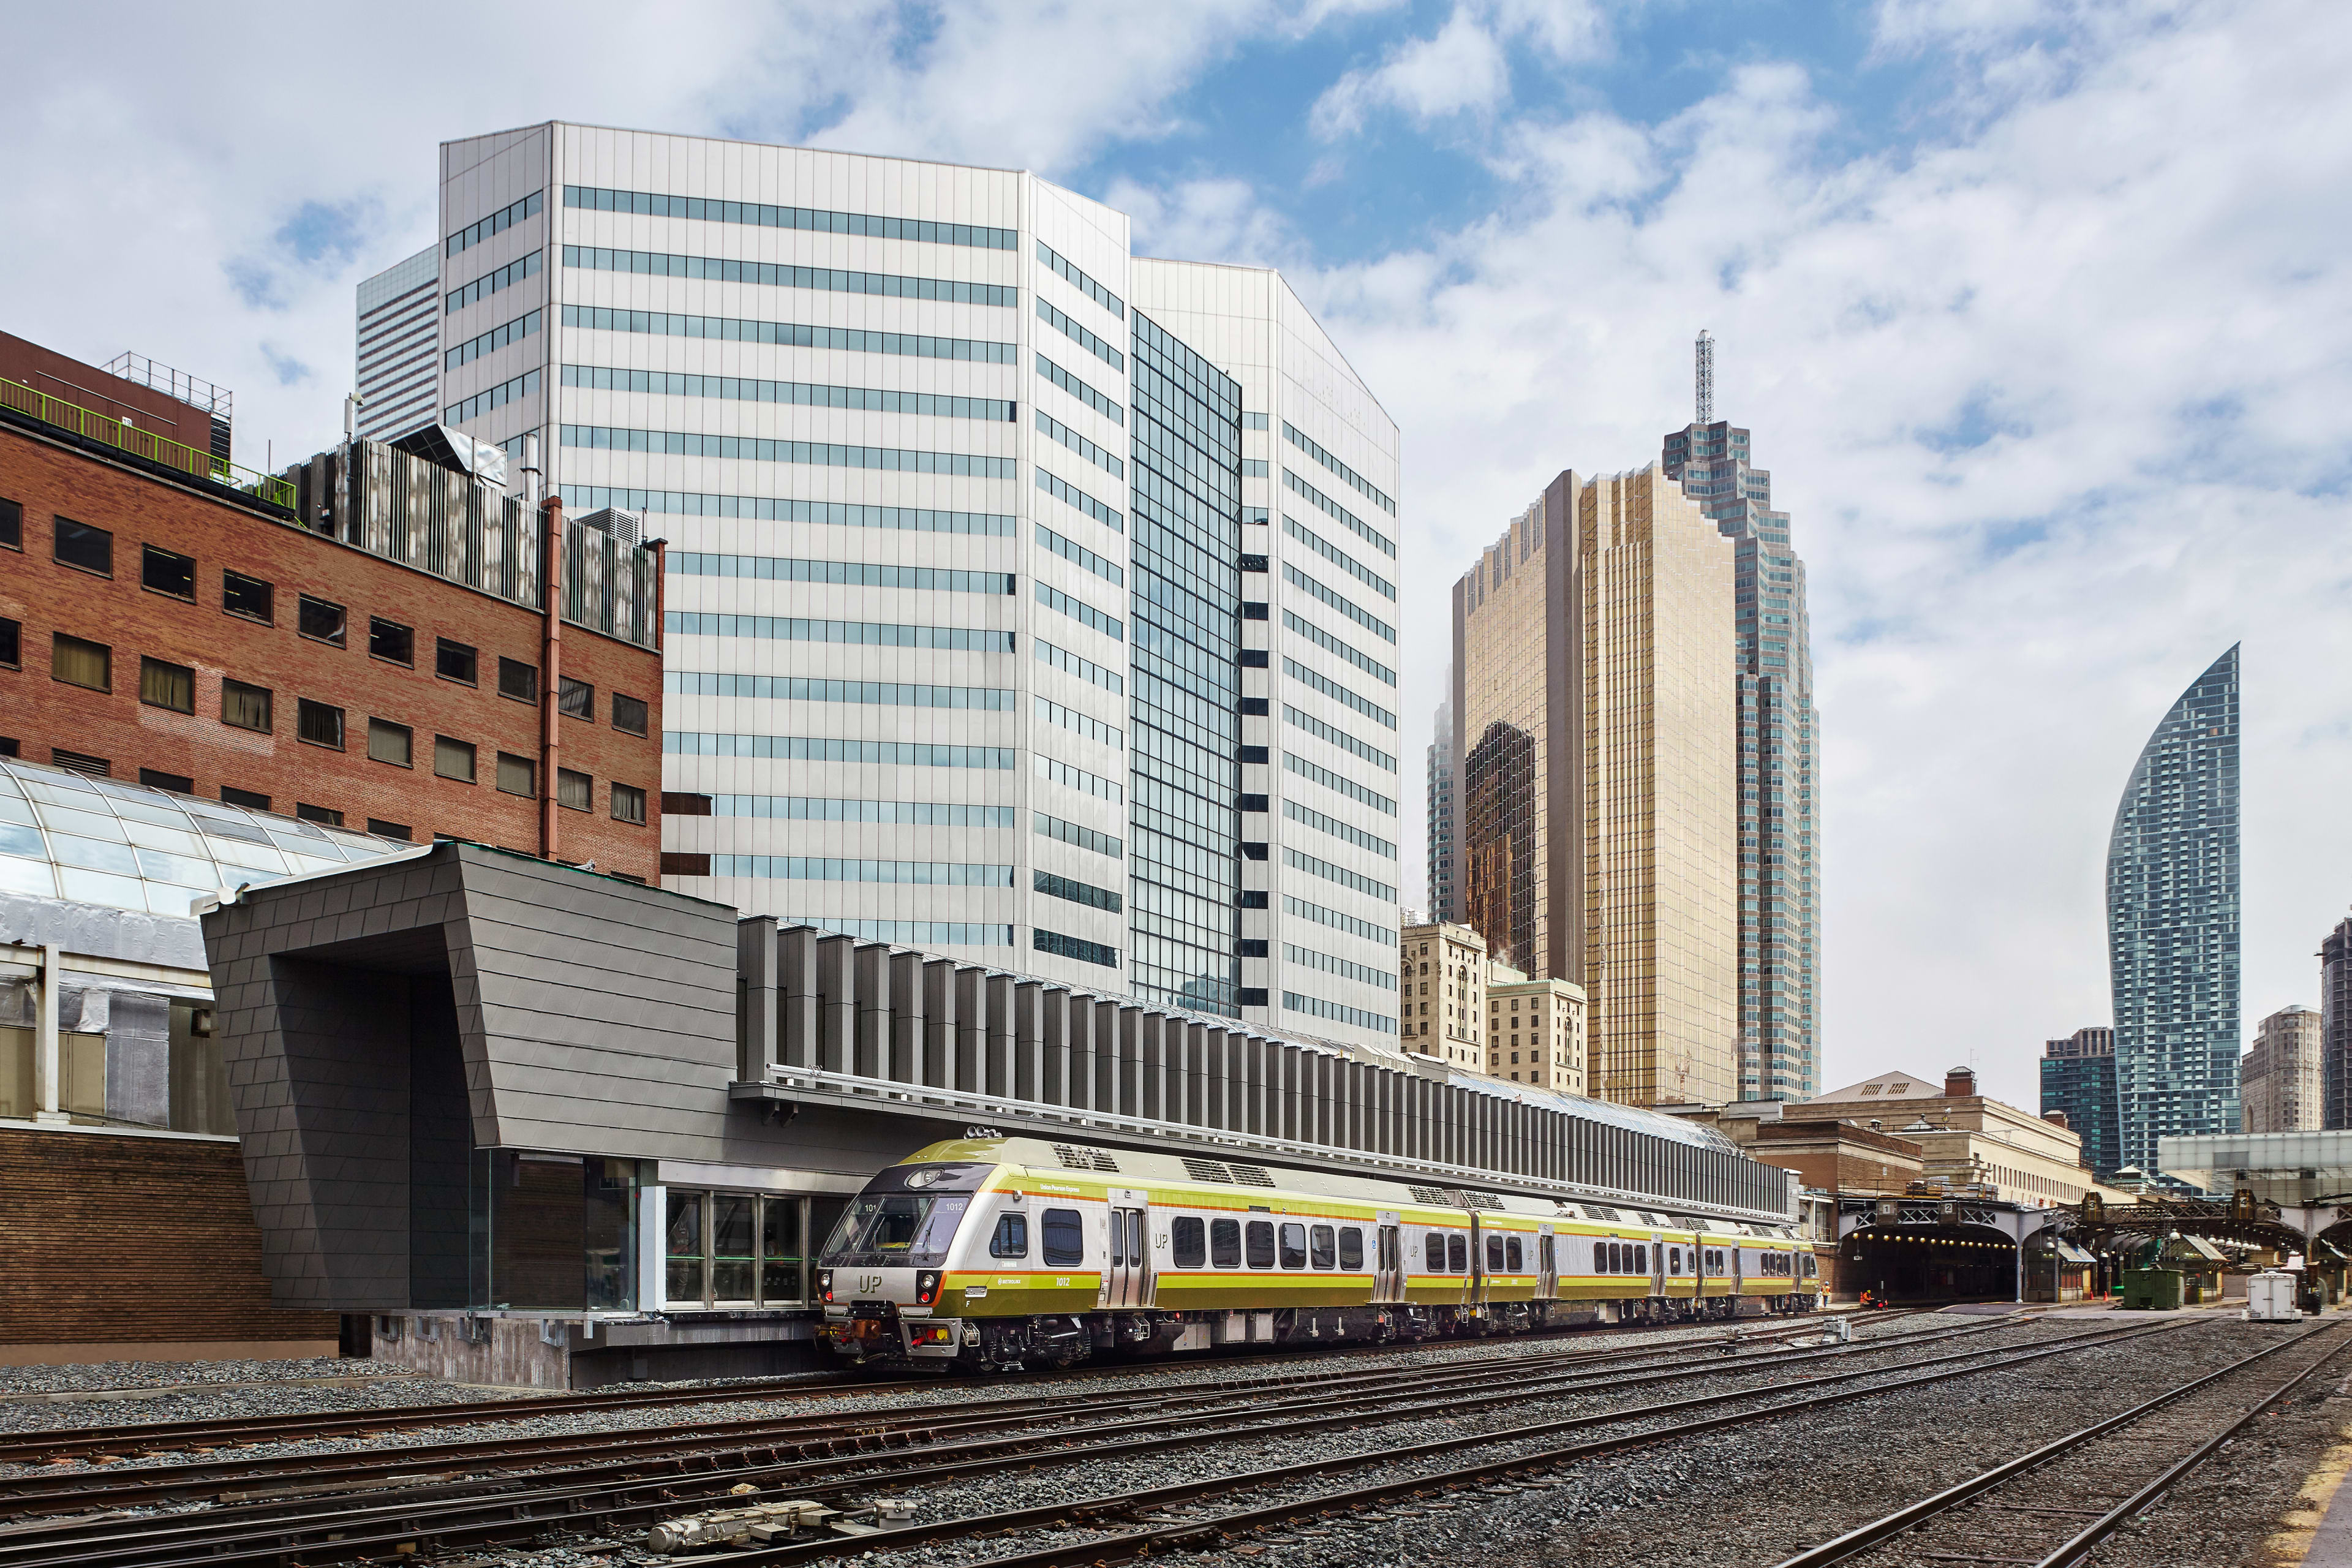 An UP Express train sits at the Union Station terminal.